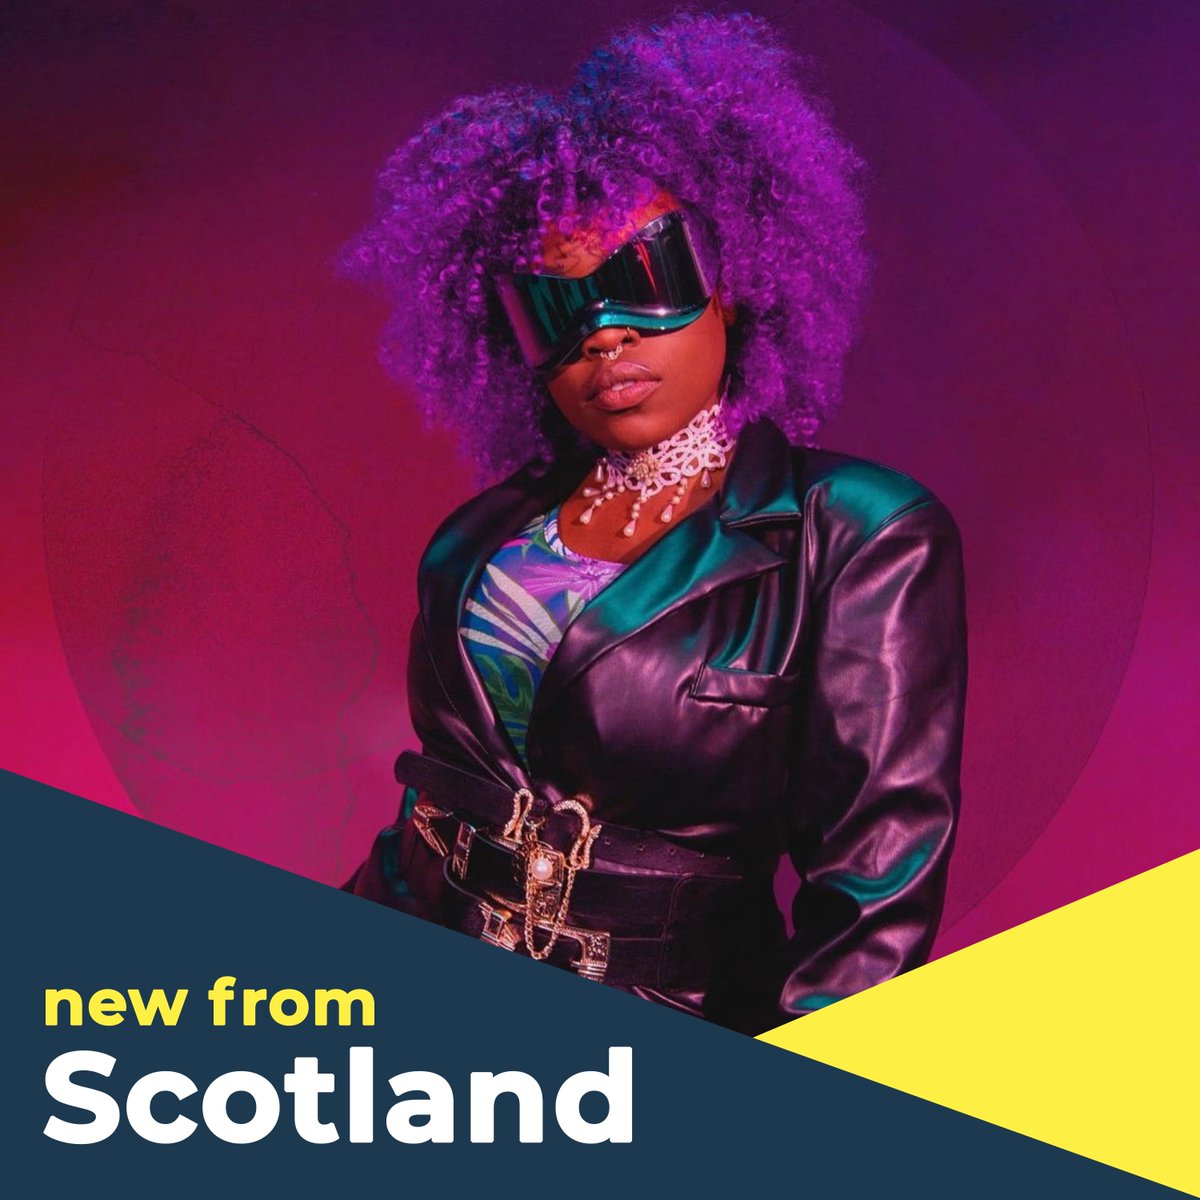 We've given our New From Scotland playlist an update with the latest tunes from around Scotland! Check out new releases from Eyve, @iamalexamor, @LuciaBestBoys, @vistasmusic, @p_actionfigures, @LewisSings, @imSHEARS, Theo Bleak and more! Listen 👉 wide.ink/NewScot